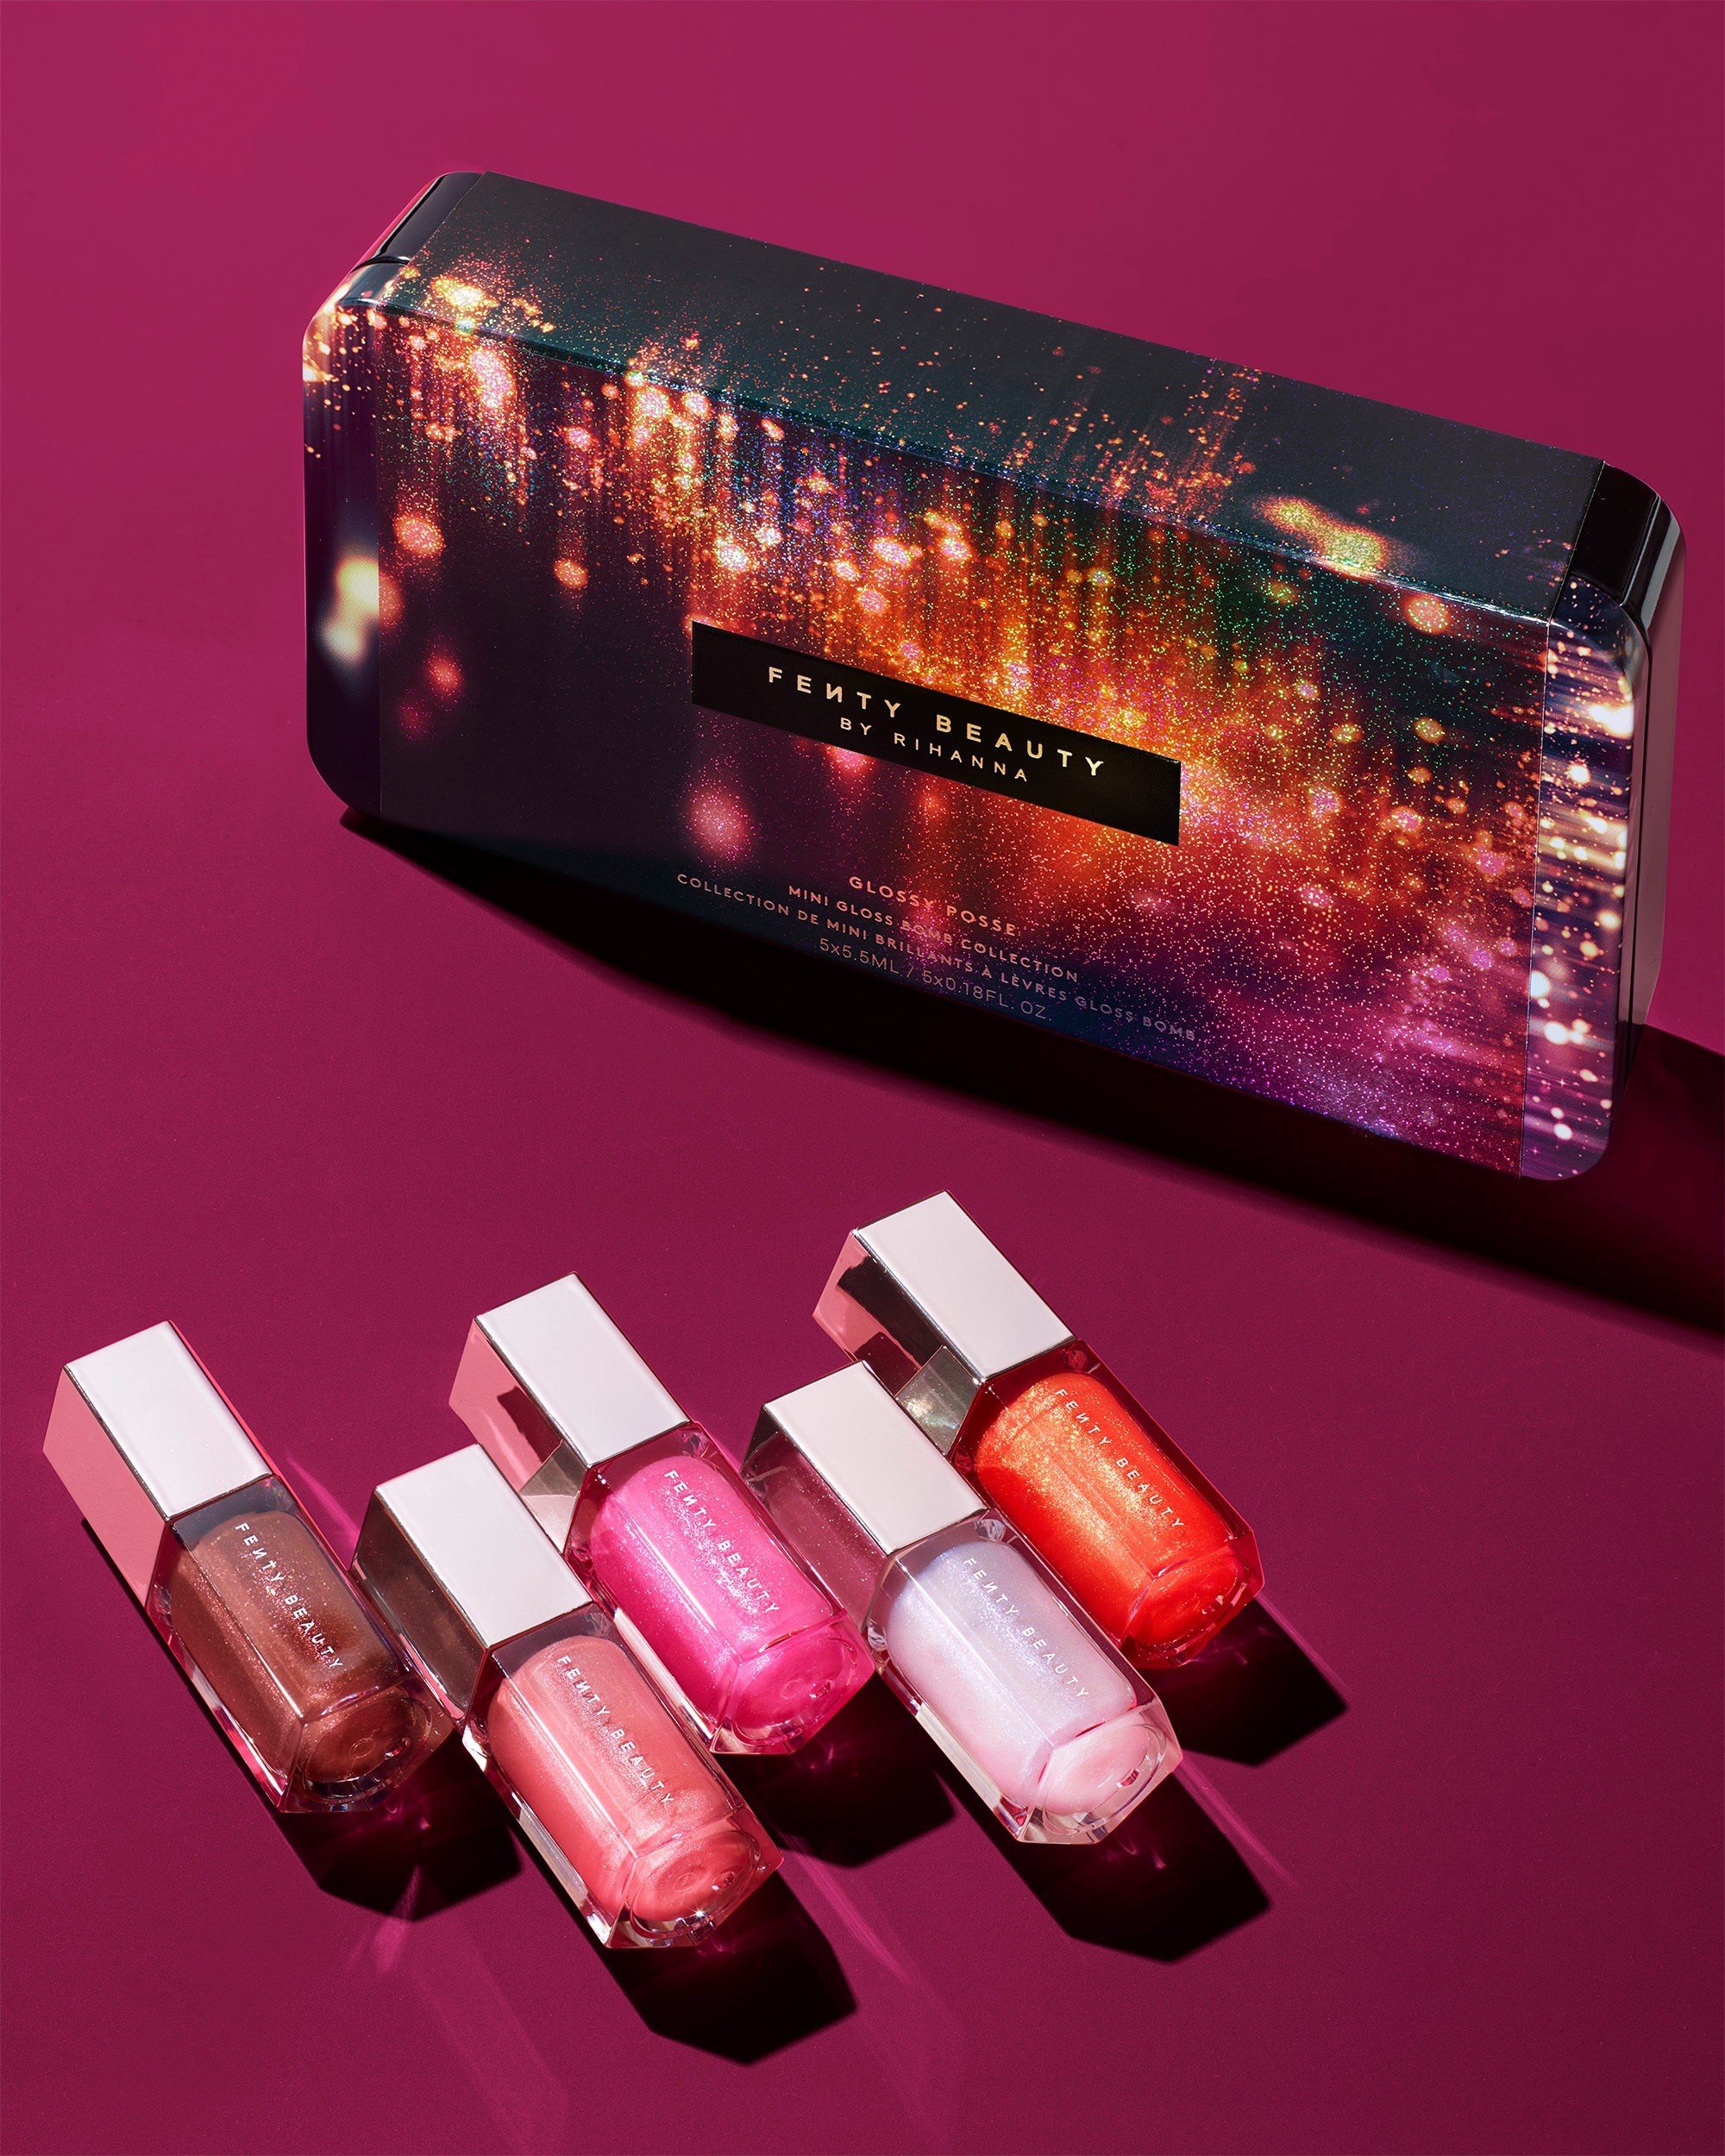 The Fenty Beauty Glossy Posse Mini Gloss Bomb Collection features five lip glosses.